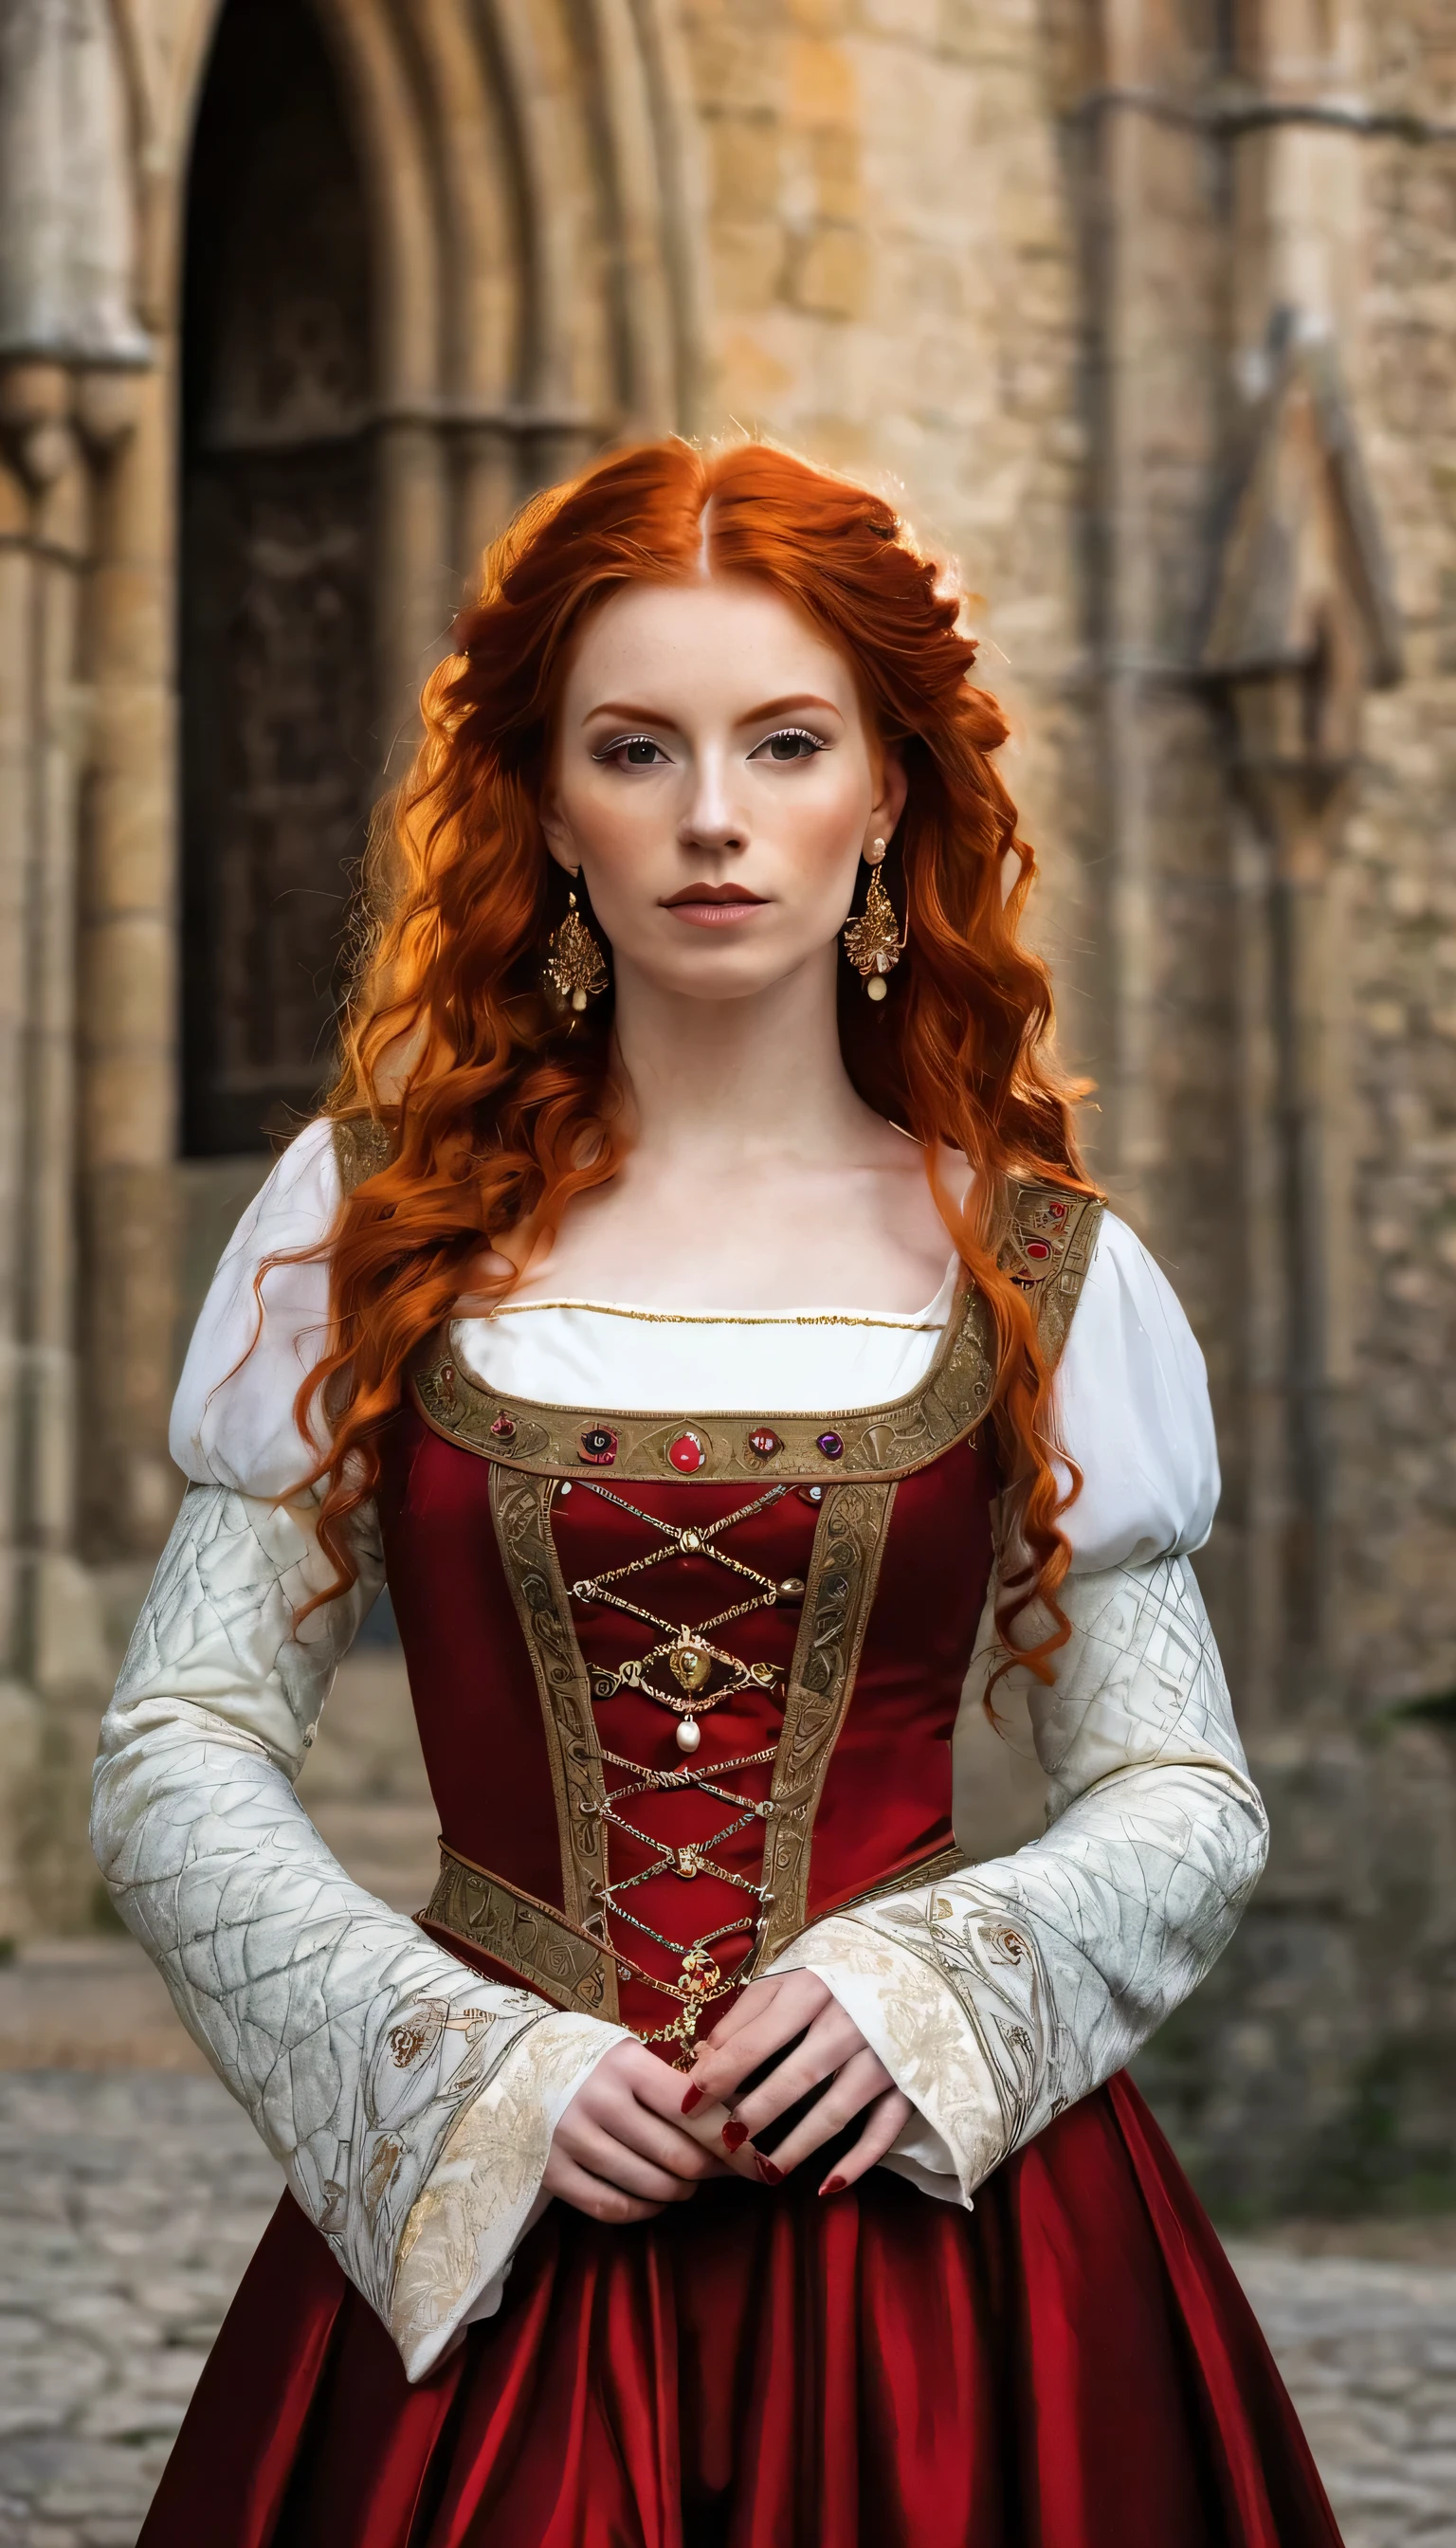 arafed woman in a medieval dress and red red hair, a photo inspired by Chica Macnab, tumblr, medieval art, medieval outfit, fashionable medieval countess, medieval clothes, medieval cathedral, gold trims, medieval chic, medieval girl, medieval regal, medieval maiden, in a medieval style, medieval regal, medieval dress